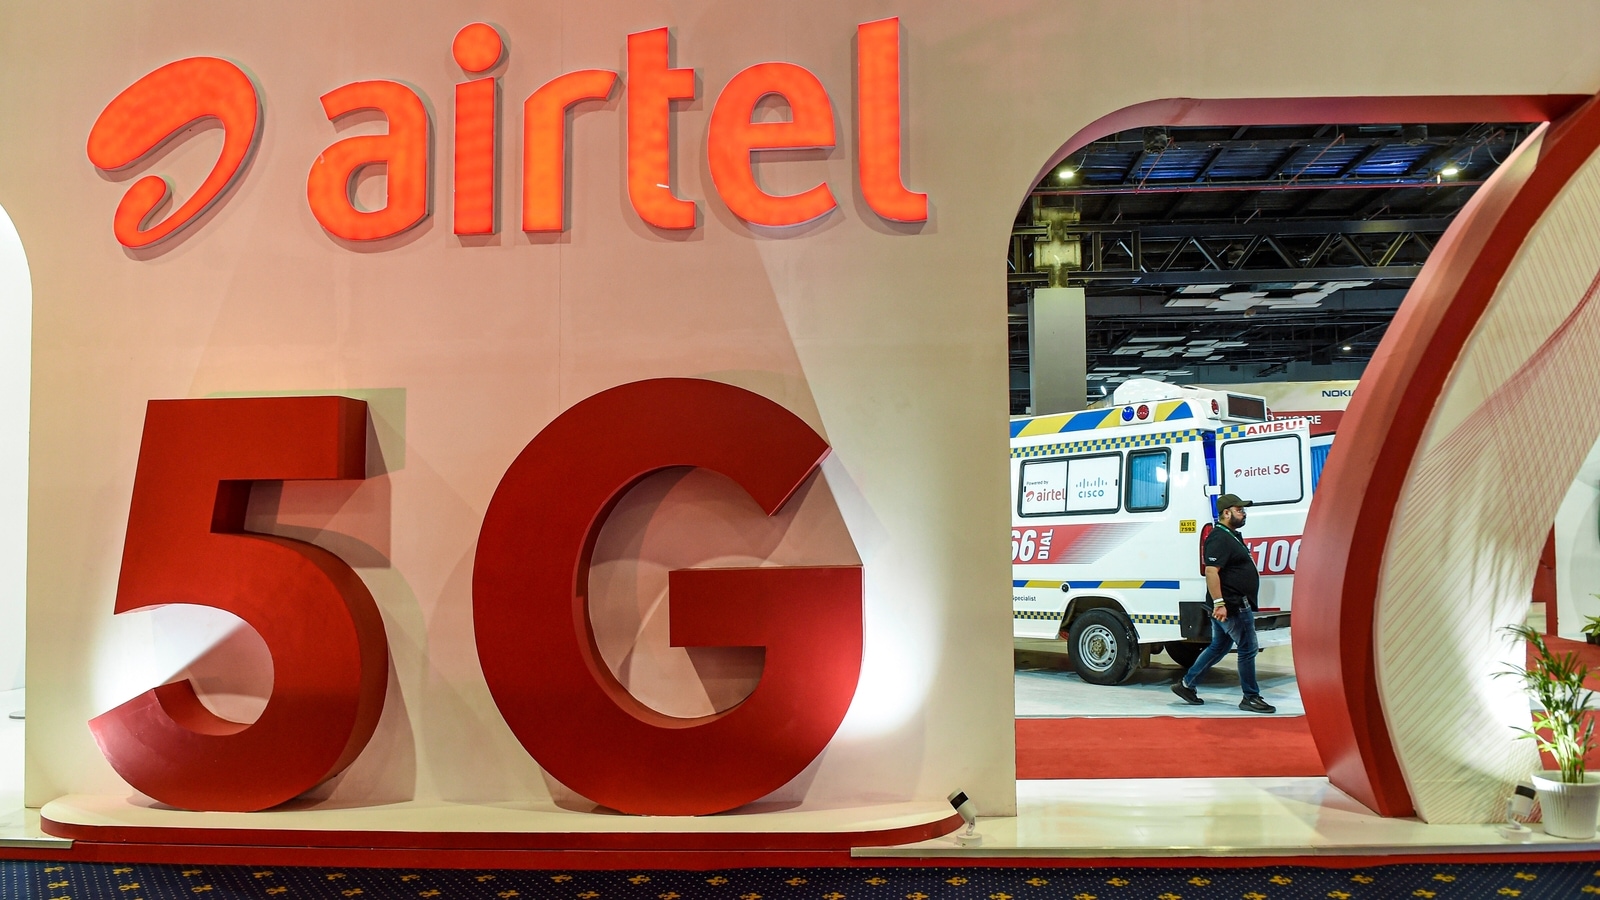 Airtel 5G Plus launches: Which devices support it? iPhone doesn’t but all Xiaomi phones do!